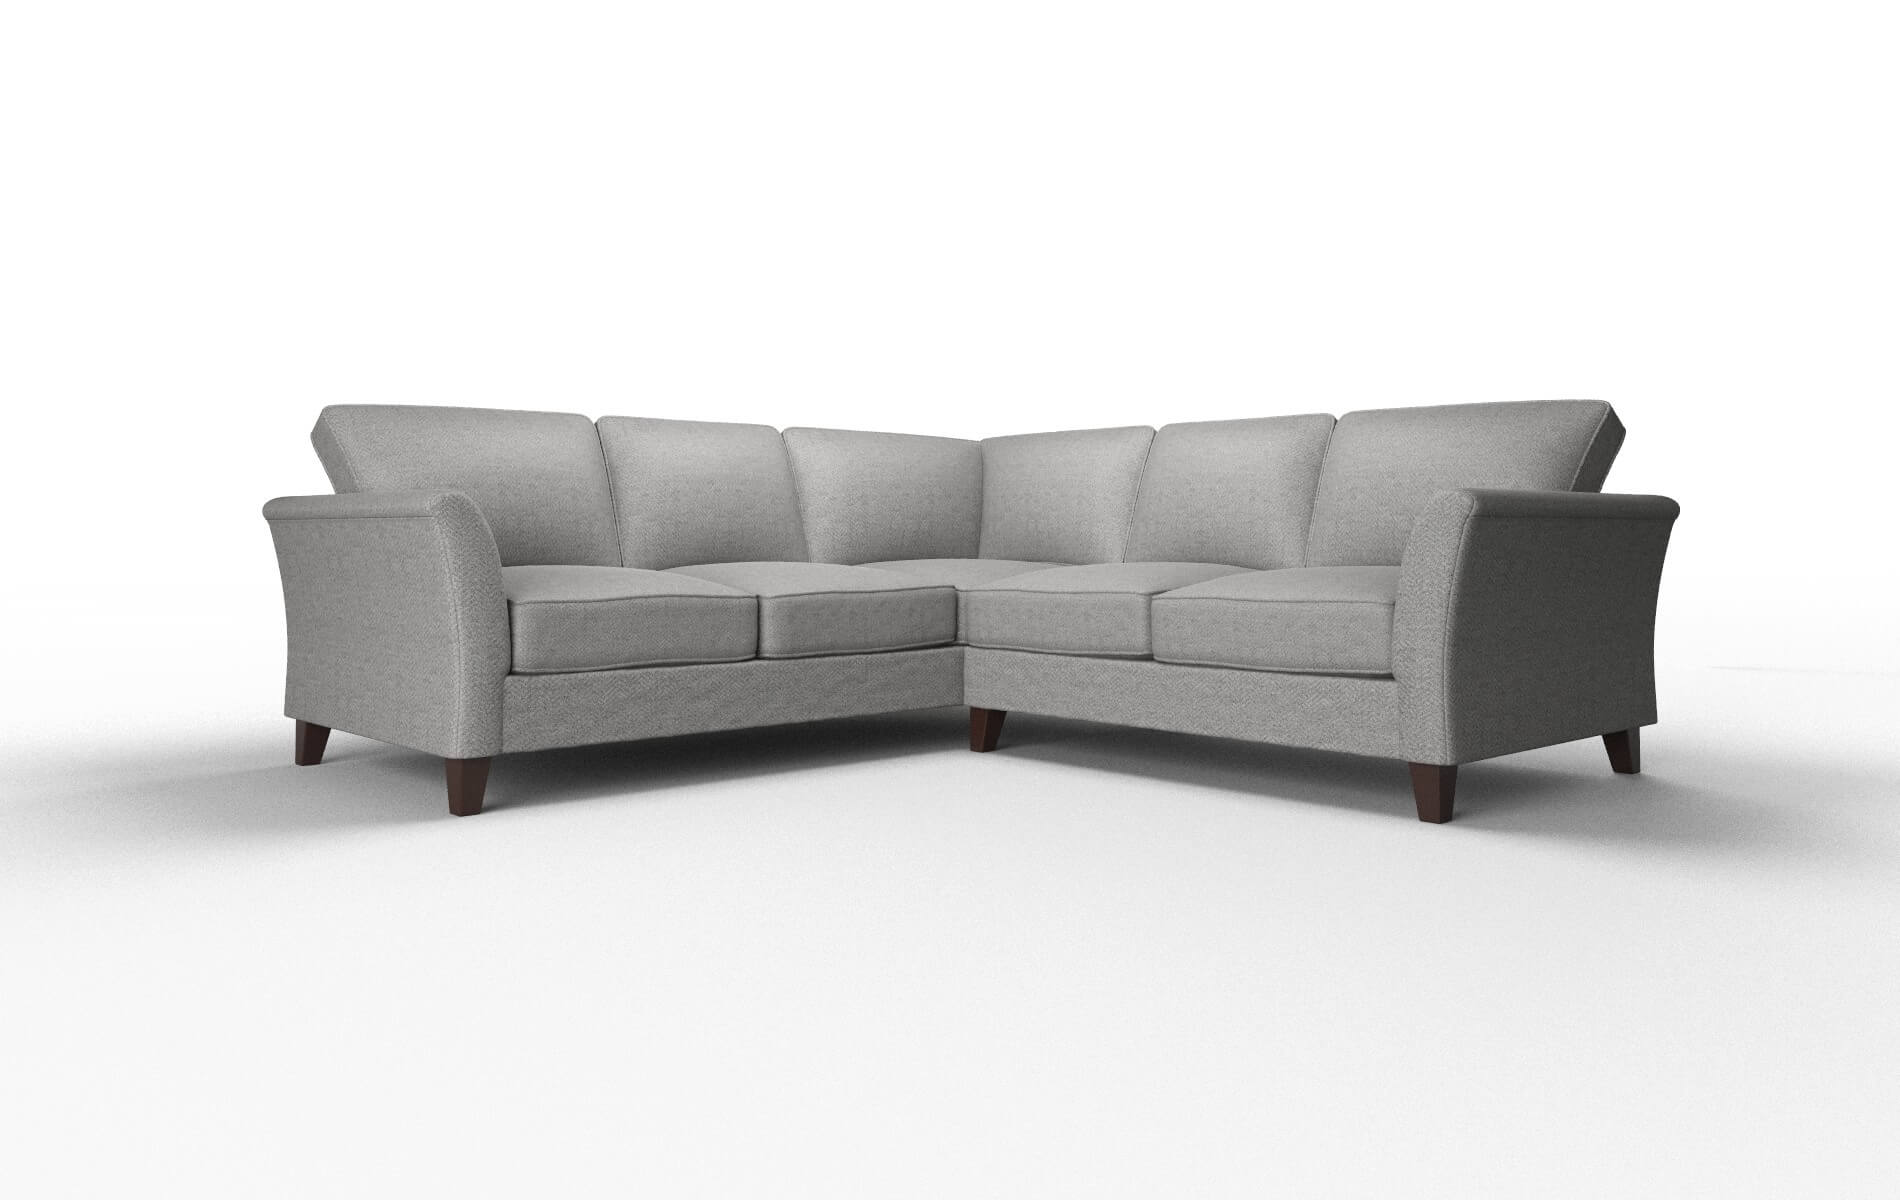 Cologne Catalina Steel Sectional espresso legs 1